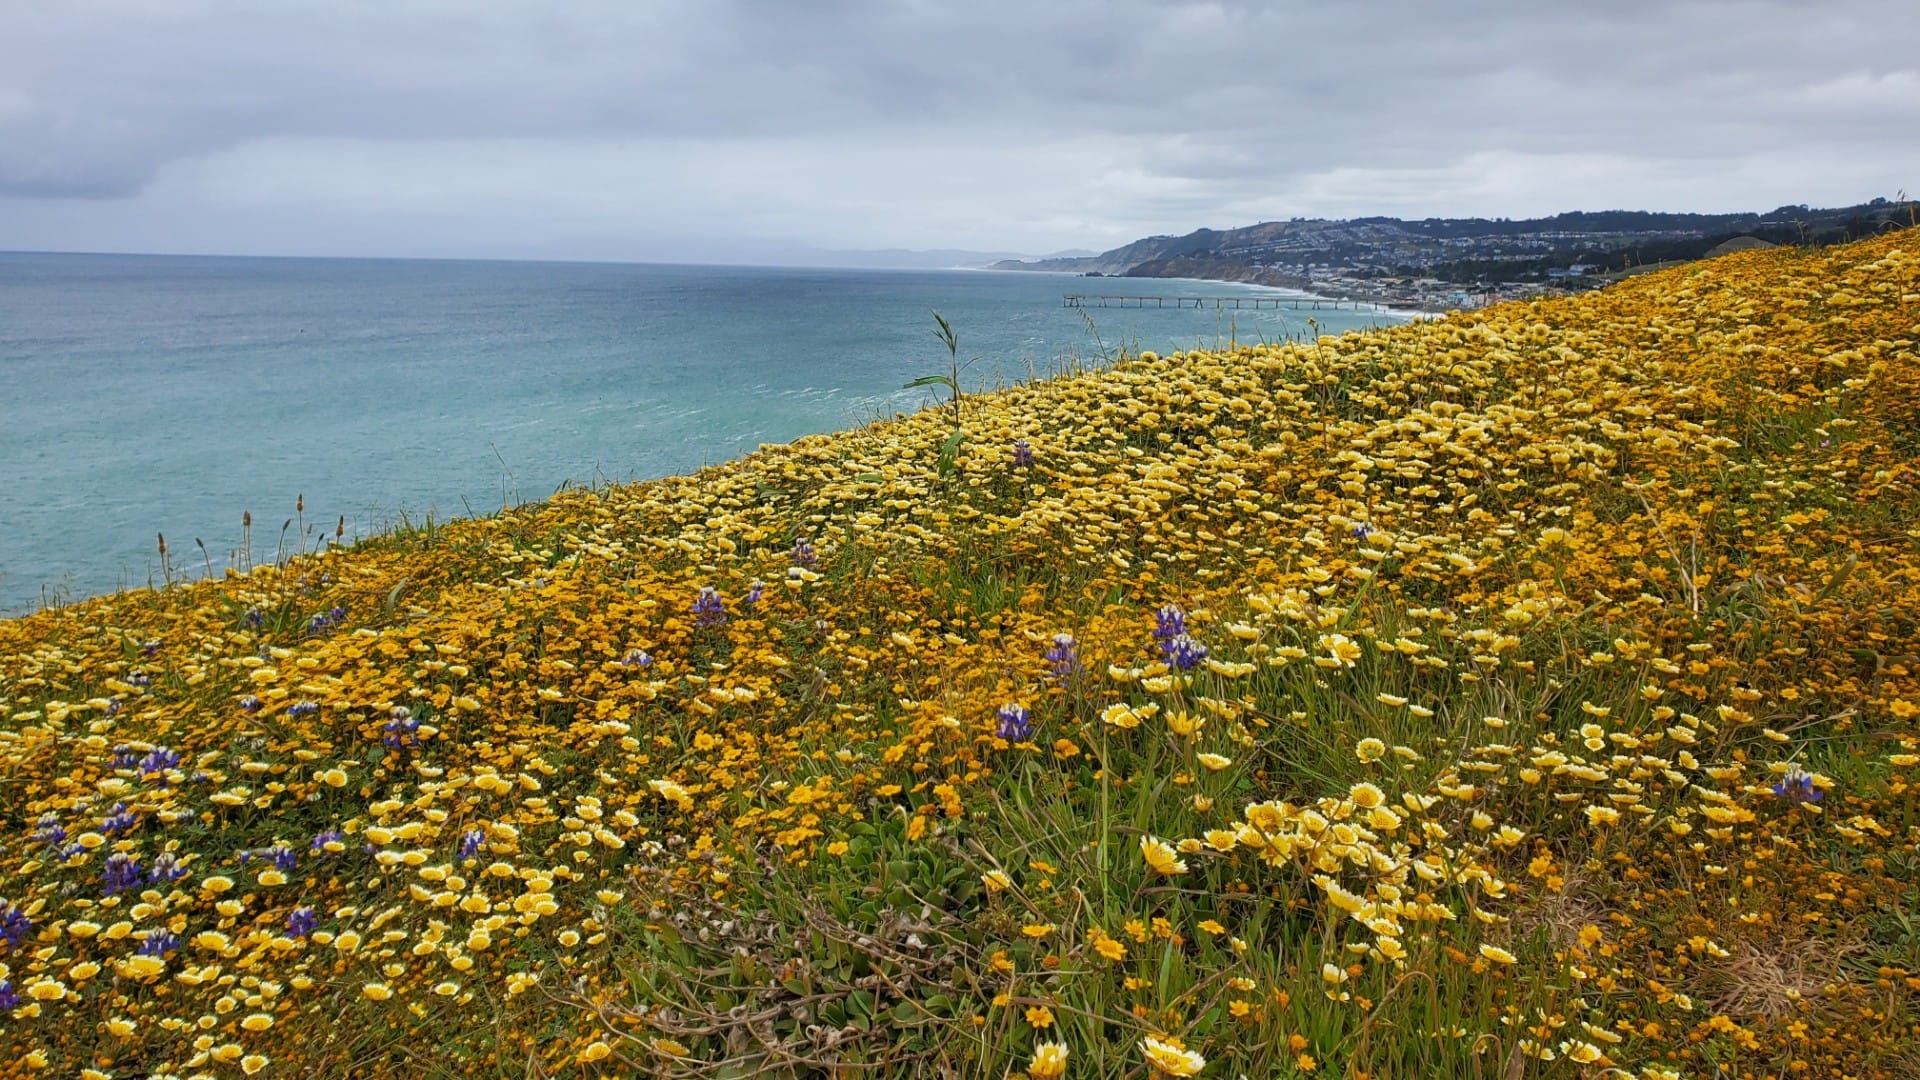 A blanket of yellow flowers with ocean, shore, and a pier behind.